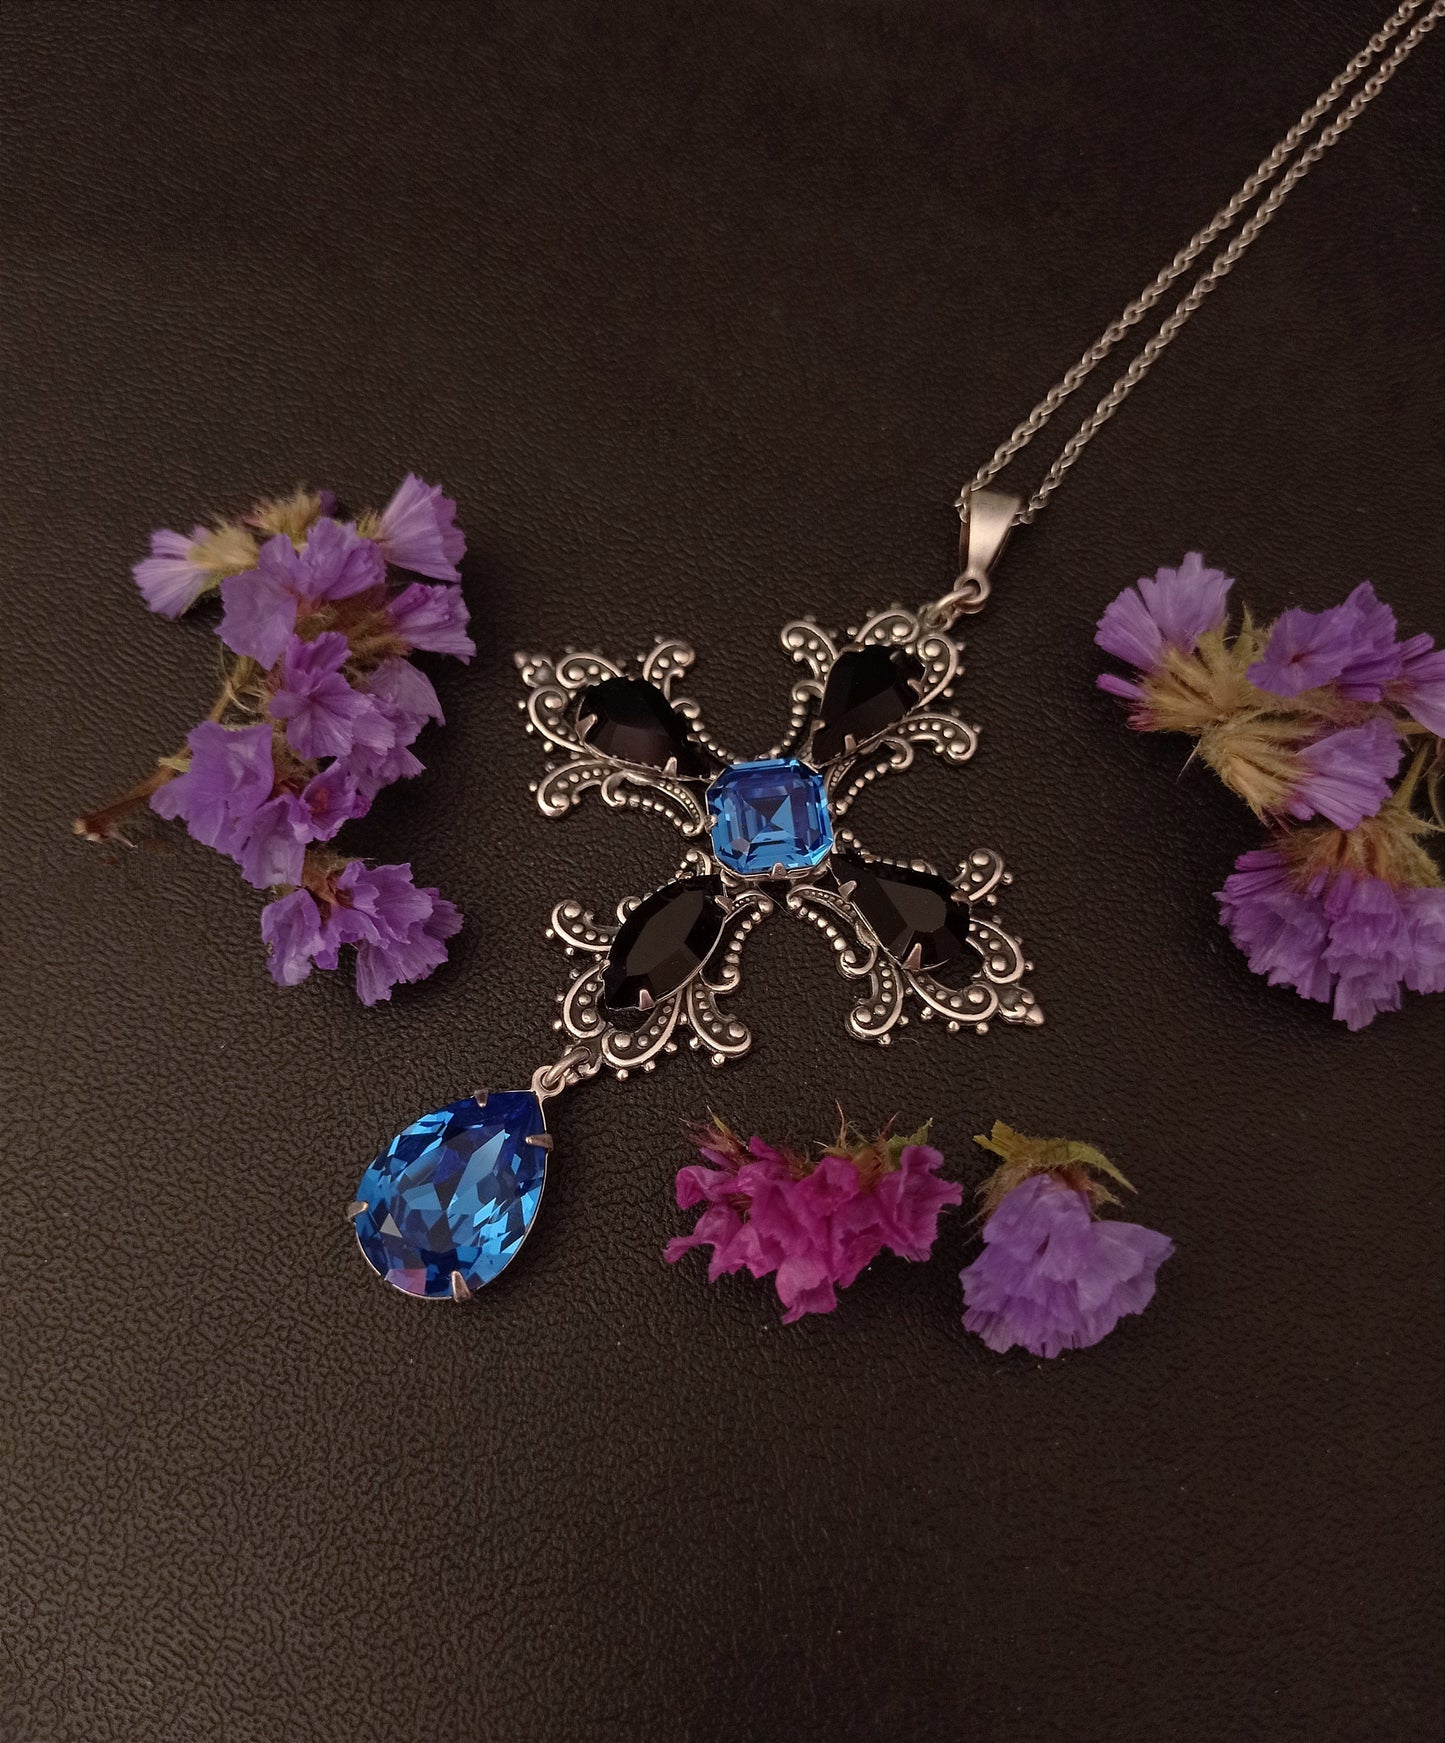 Gothic Cross Necklace with Blue and Black Swarovski Crystals